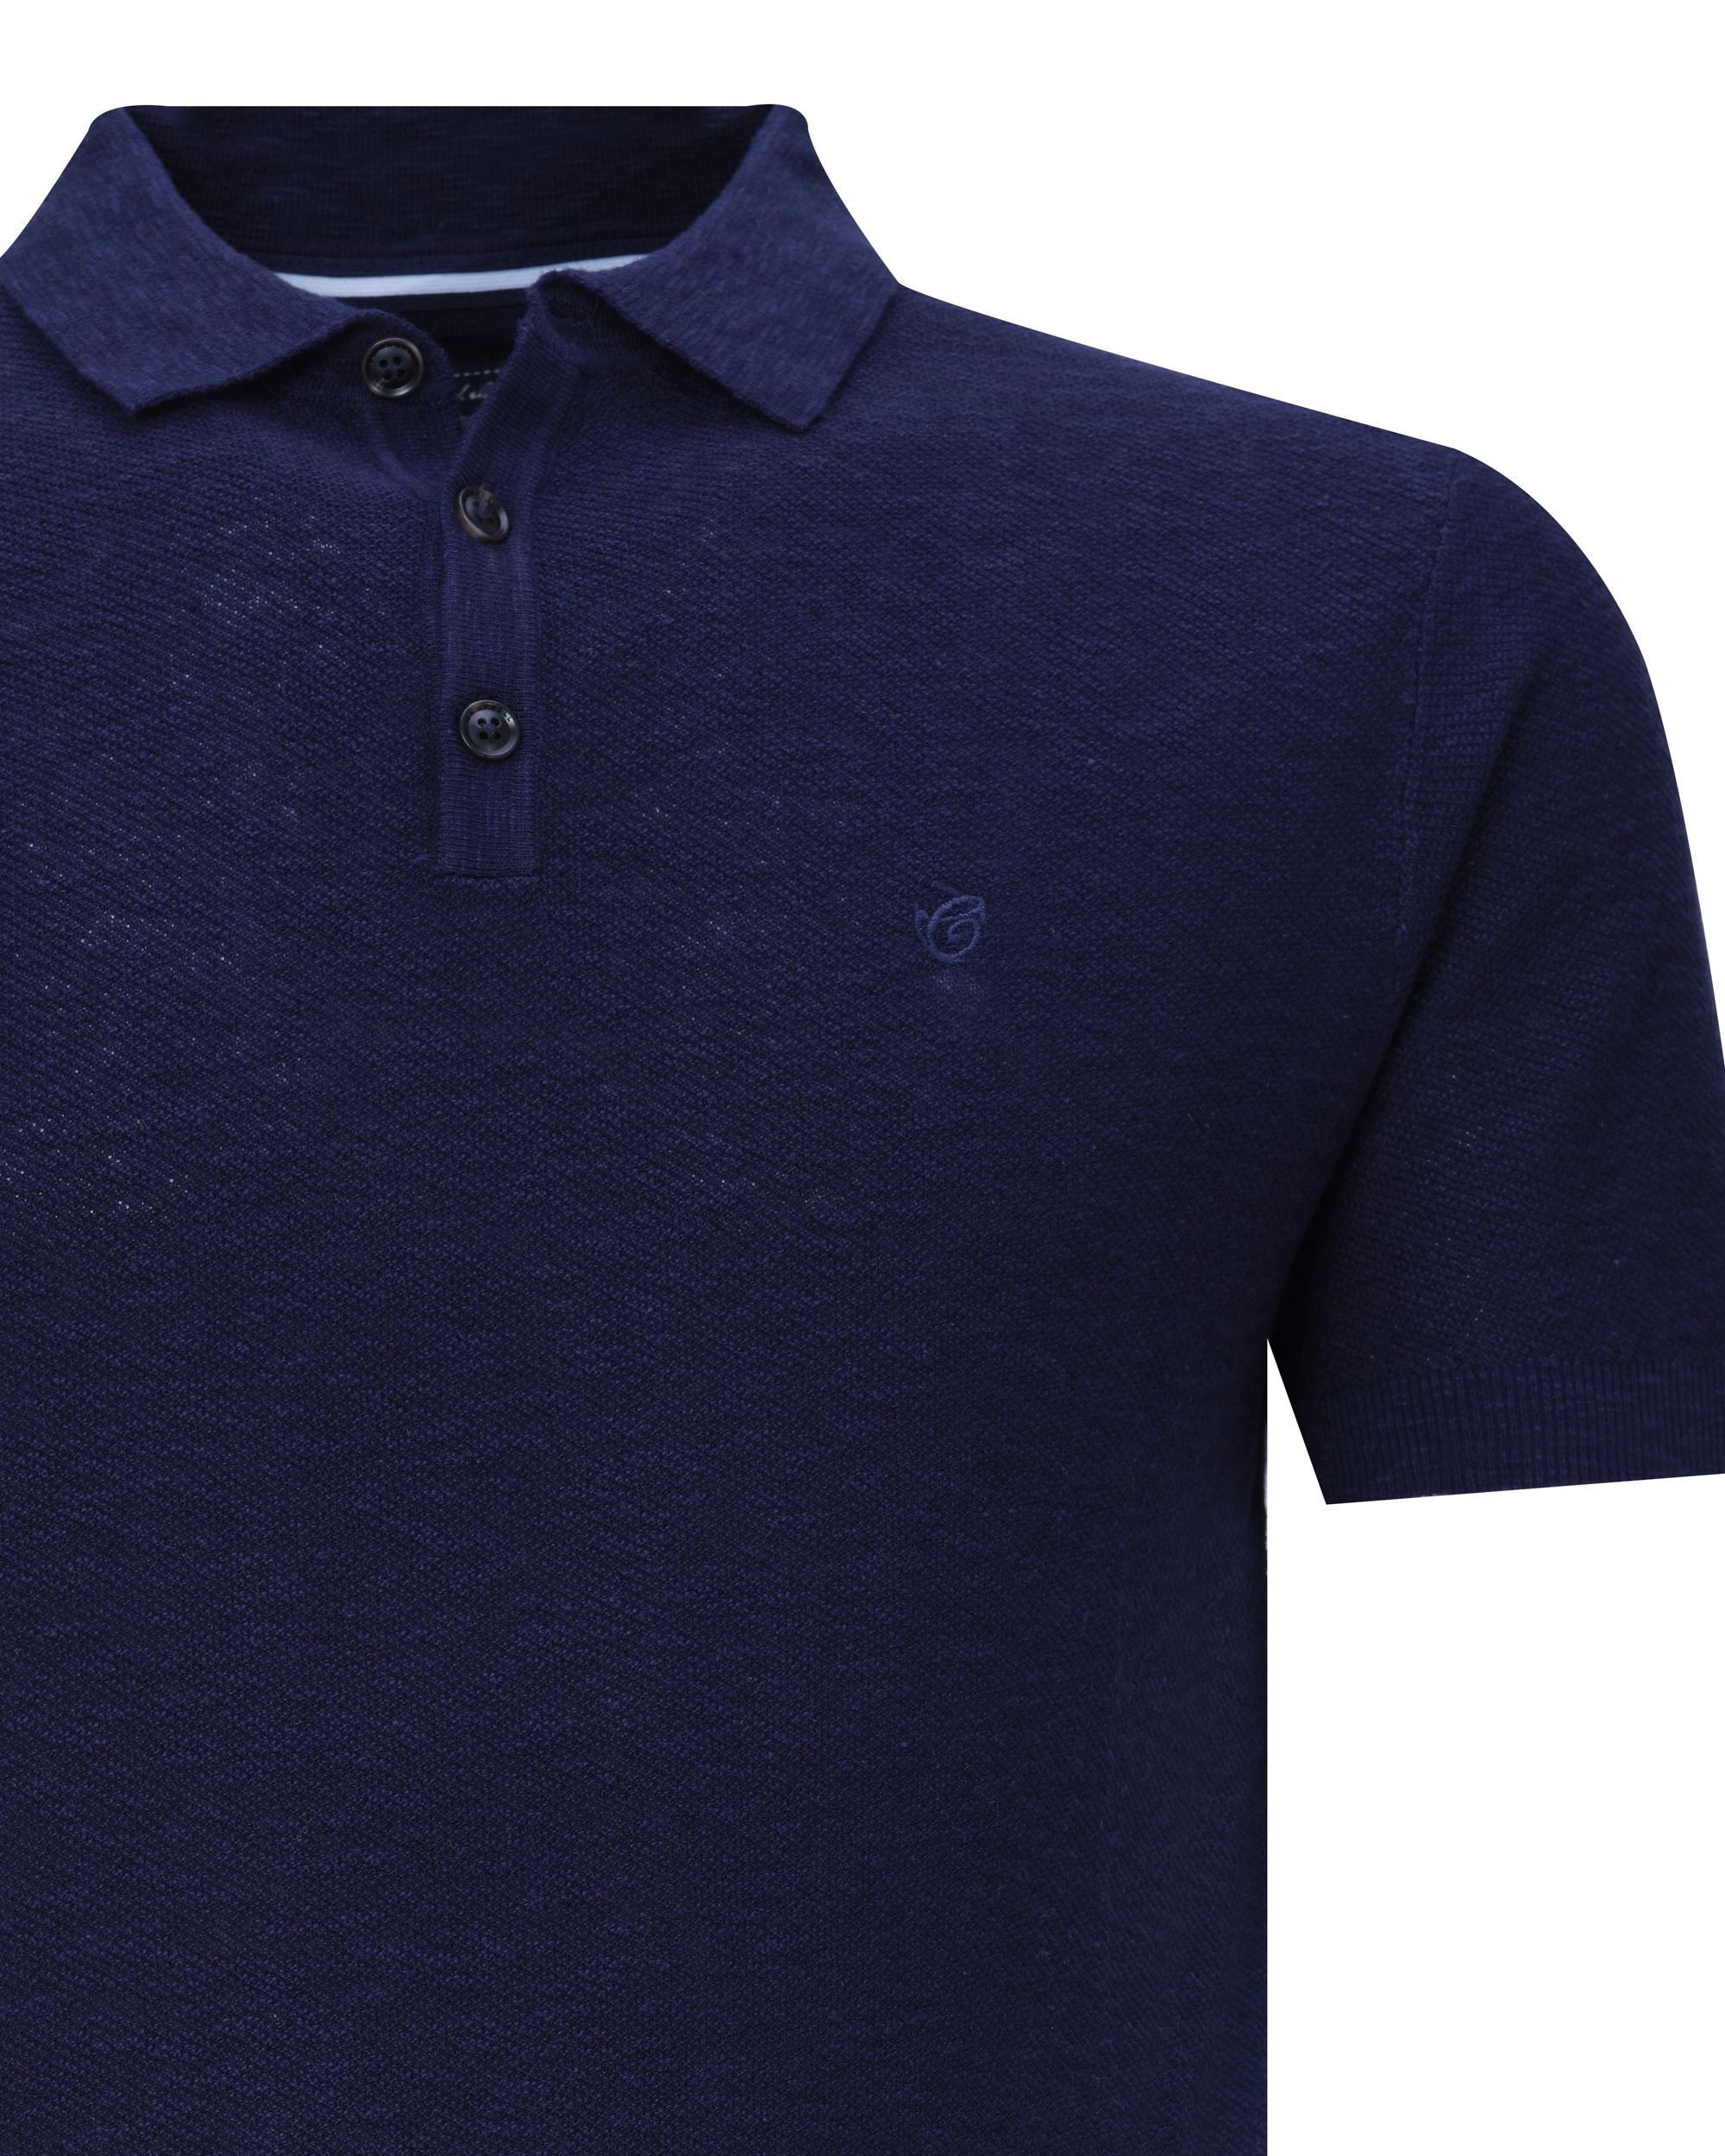 Campbell Classic Steinway Polo KM NAVY 074106-005-L